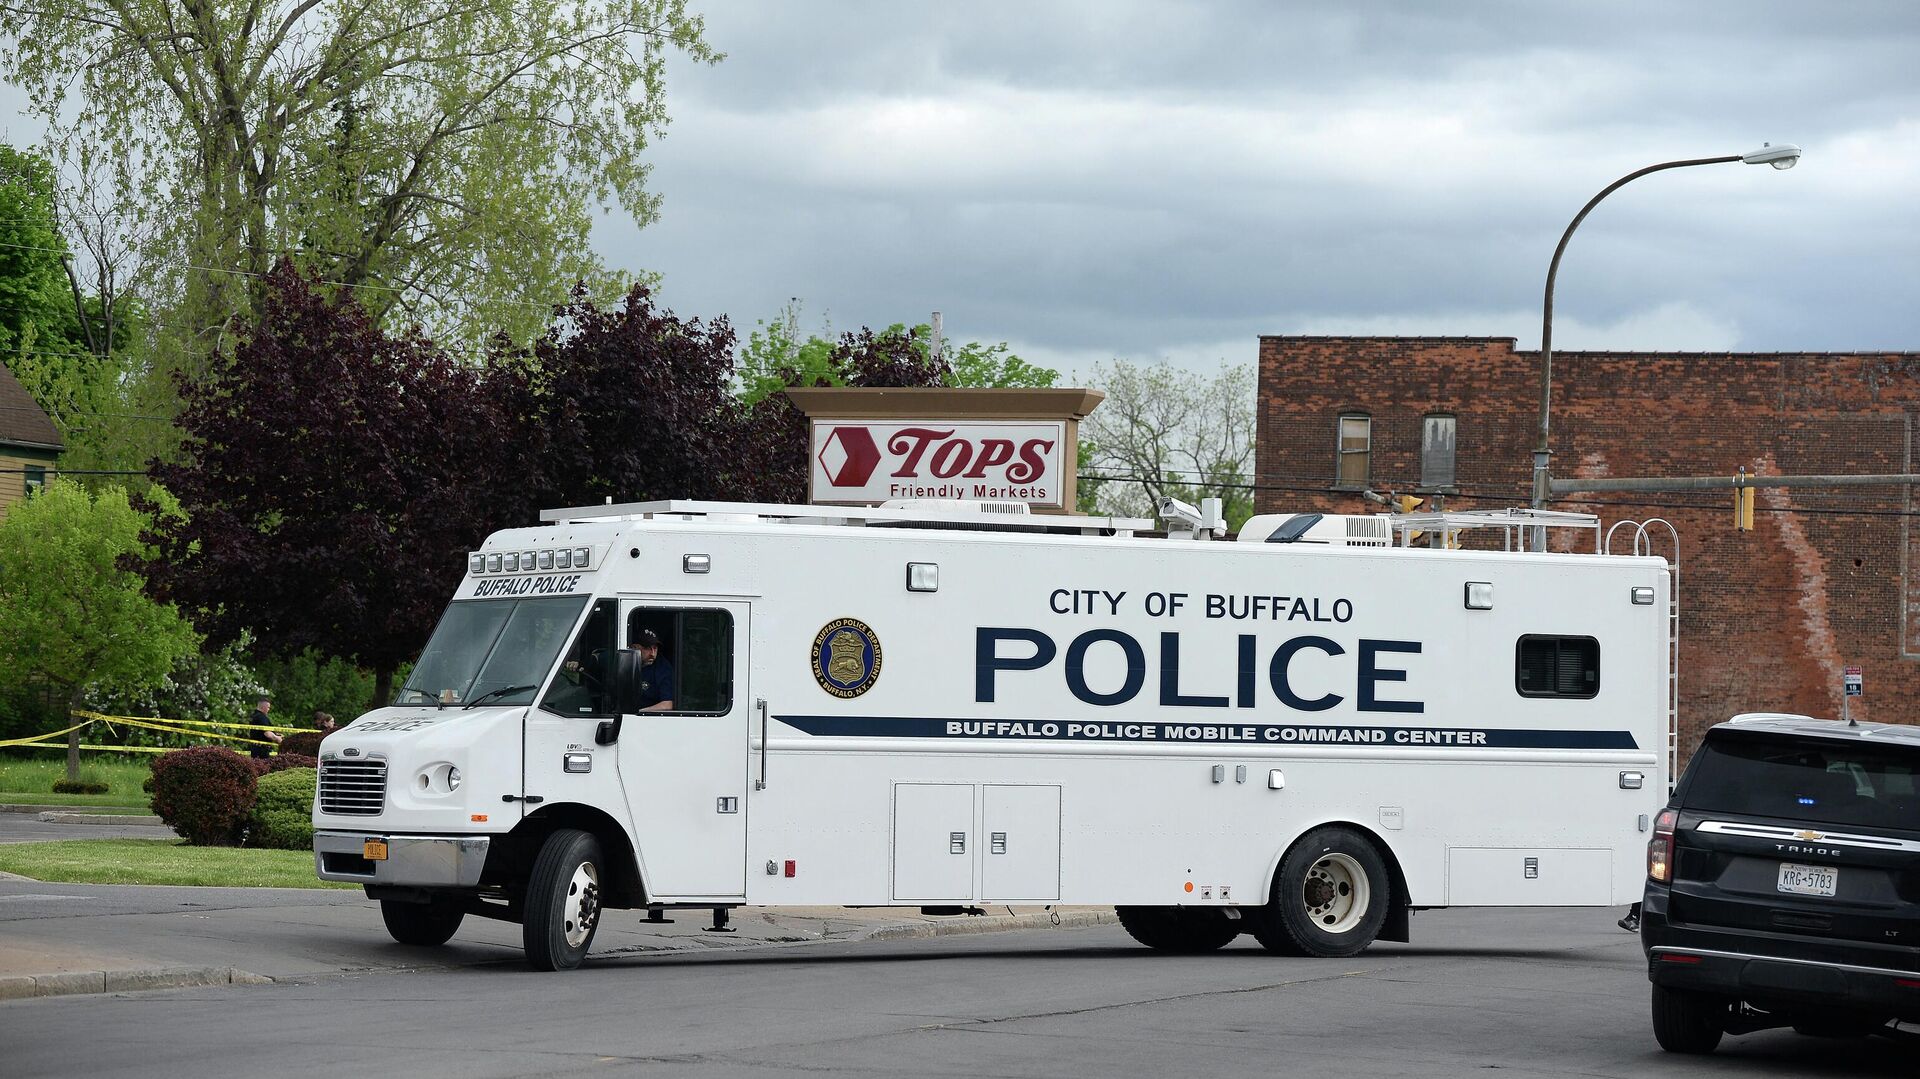 Buffalo Police on scene at a Tops Friendly Market on 14 May, 2022 in Buffalo, New York. According to reports, at least 10 people were killed after a mass shooting at the store with the shooter in police custody. - Sputnik International, 1920, 15.05.2022